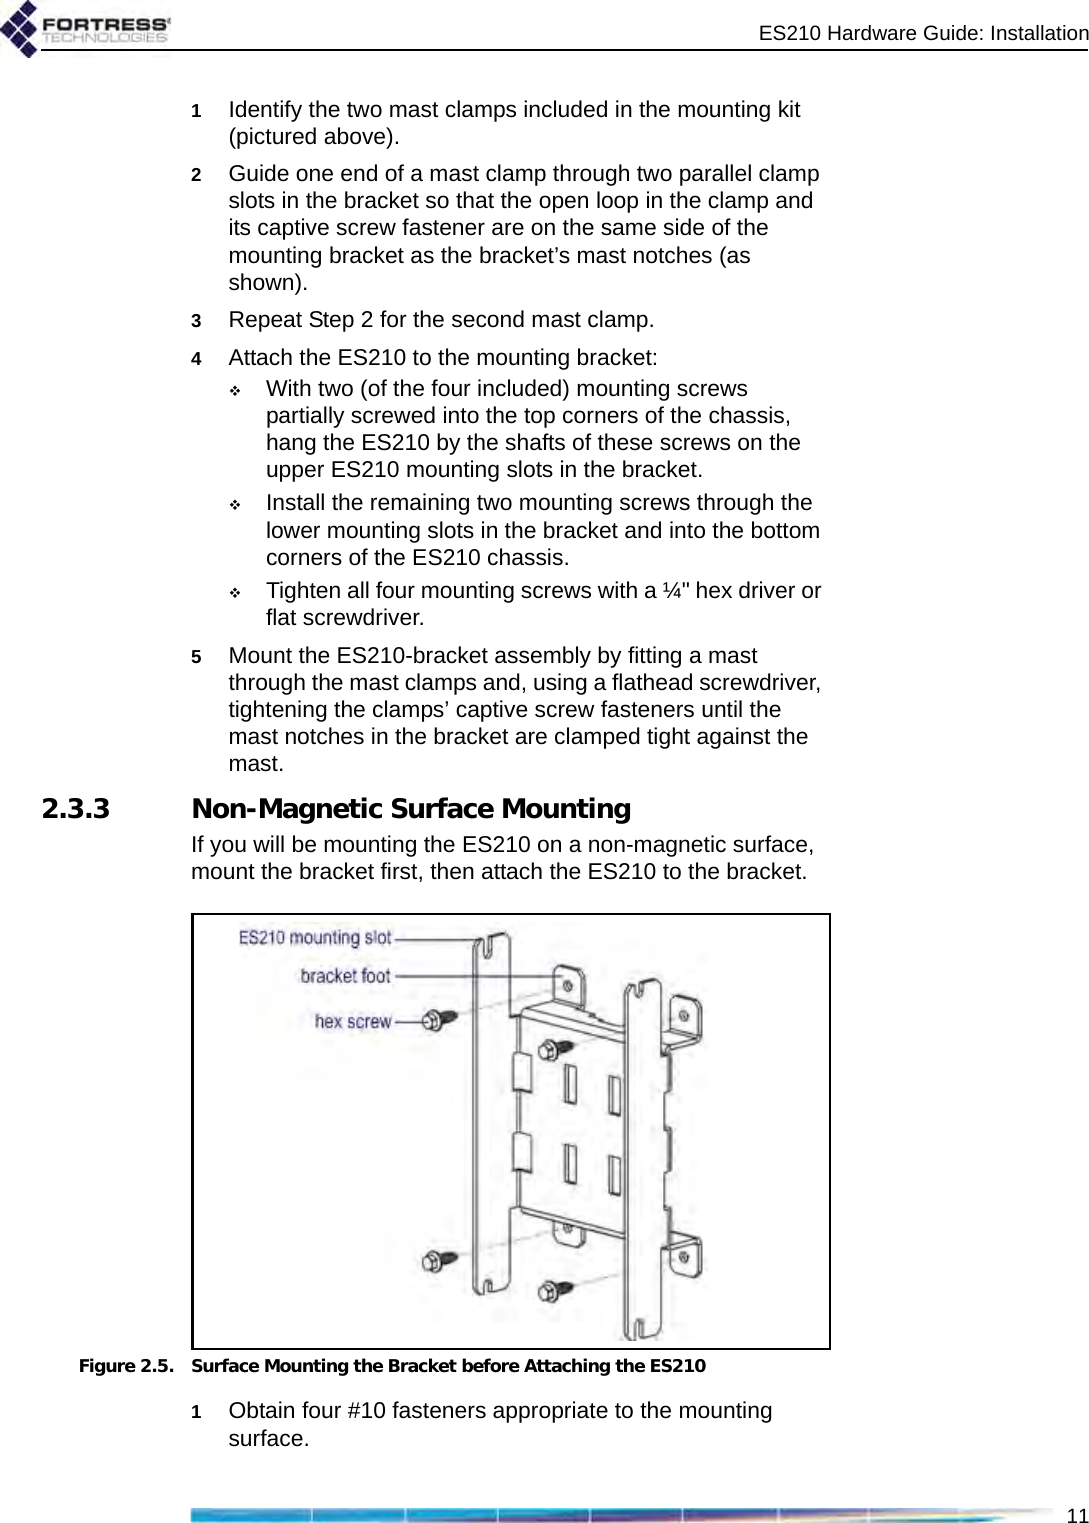 ES210 Hardware Guide: Installation111Identify the two mast clamps included in the mounting kit (pictured above).2Guide one end of a mast clamp through two parallel clamp slots in the bracket so that the open loop in the clamp and its captive screw fastener are on the same side of the mounting bracket as the bracket’s mast notches (as shown).3Repeat Step 2 for the second mast clamp.4Attach the ES210 to the mounting bracket: With two (of the four included) mounting screws partially screwed into the top corners of the chassis, hang the ES210 by the shafts of these screws on the upper ES210 mounting slots in the bracket.Install the remaining two mounting screws through the lower mounting slots in the bracket and into the bottom corners of the ES210 chassis.Tighten all four mounting screws with a ¼&quot; hex driver or flat screwdriver.5Mount the ES210-bracket assembly by fitting a mast through the mast clamps and, using a flathead screwdriver, tightening the clamps’ captive screw fasteners until the mast notches in the bracket are clamped tight against the mast.2.3.3 Non-Magnetic Surface MountingIf you will be mounting the ES210 on a non-magnetic surface, mount the bracket first, then attach the ES210 to the bracket.Figure 2.5. Surface Mounting the Bracket before Attaching the ES2101Obtain four #10 fasteners appropriate to the mounting surface.